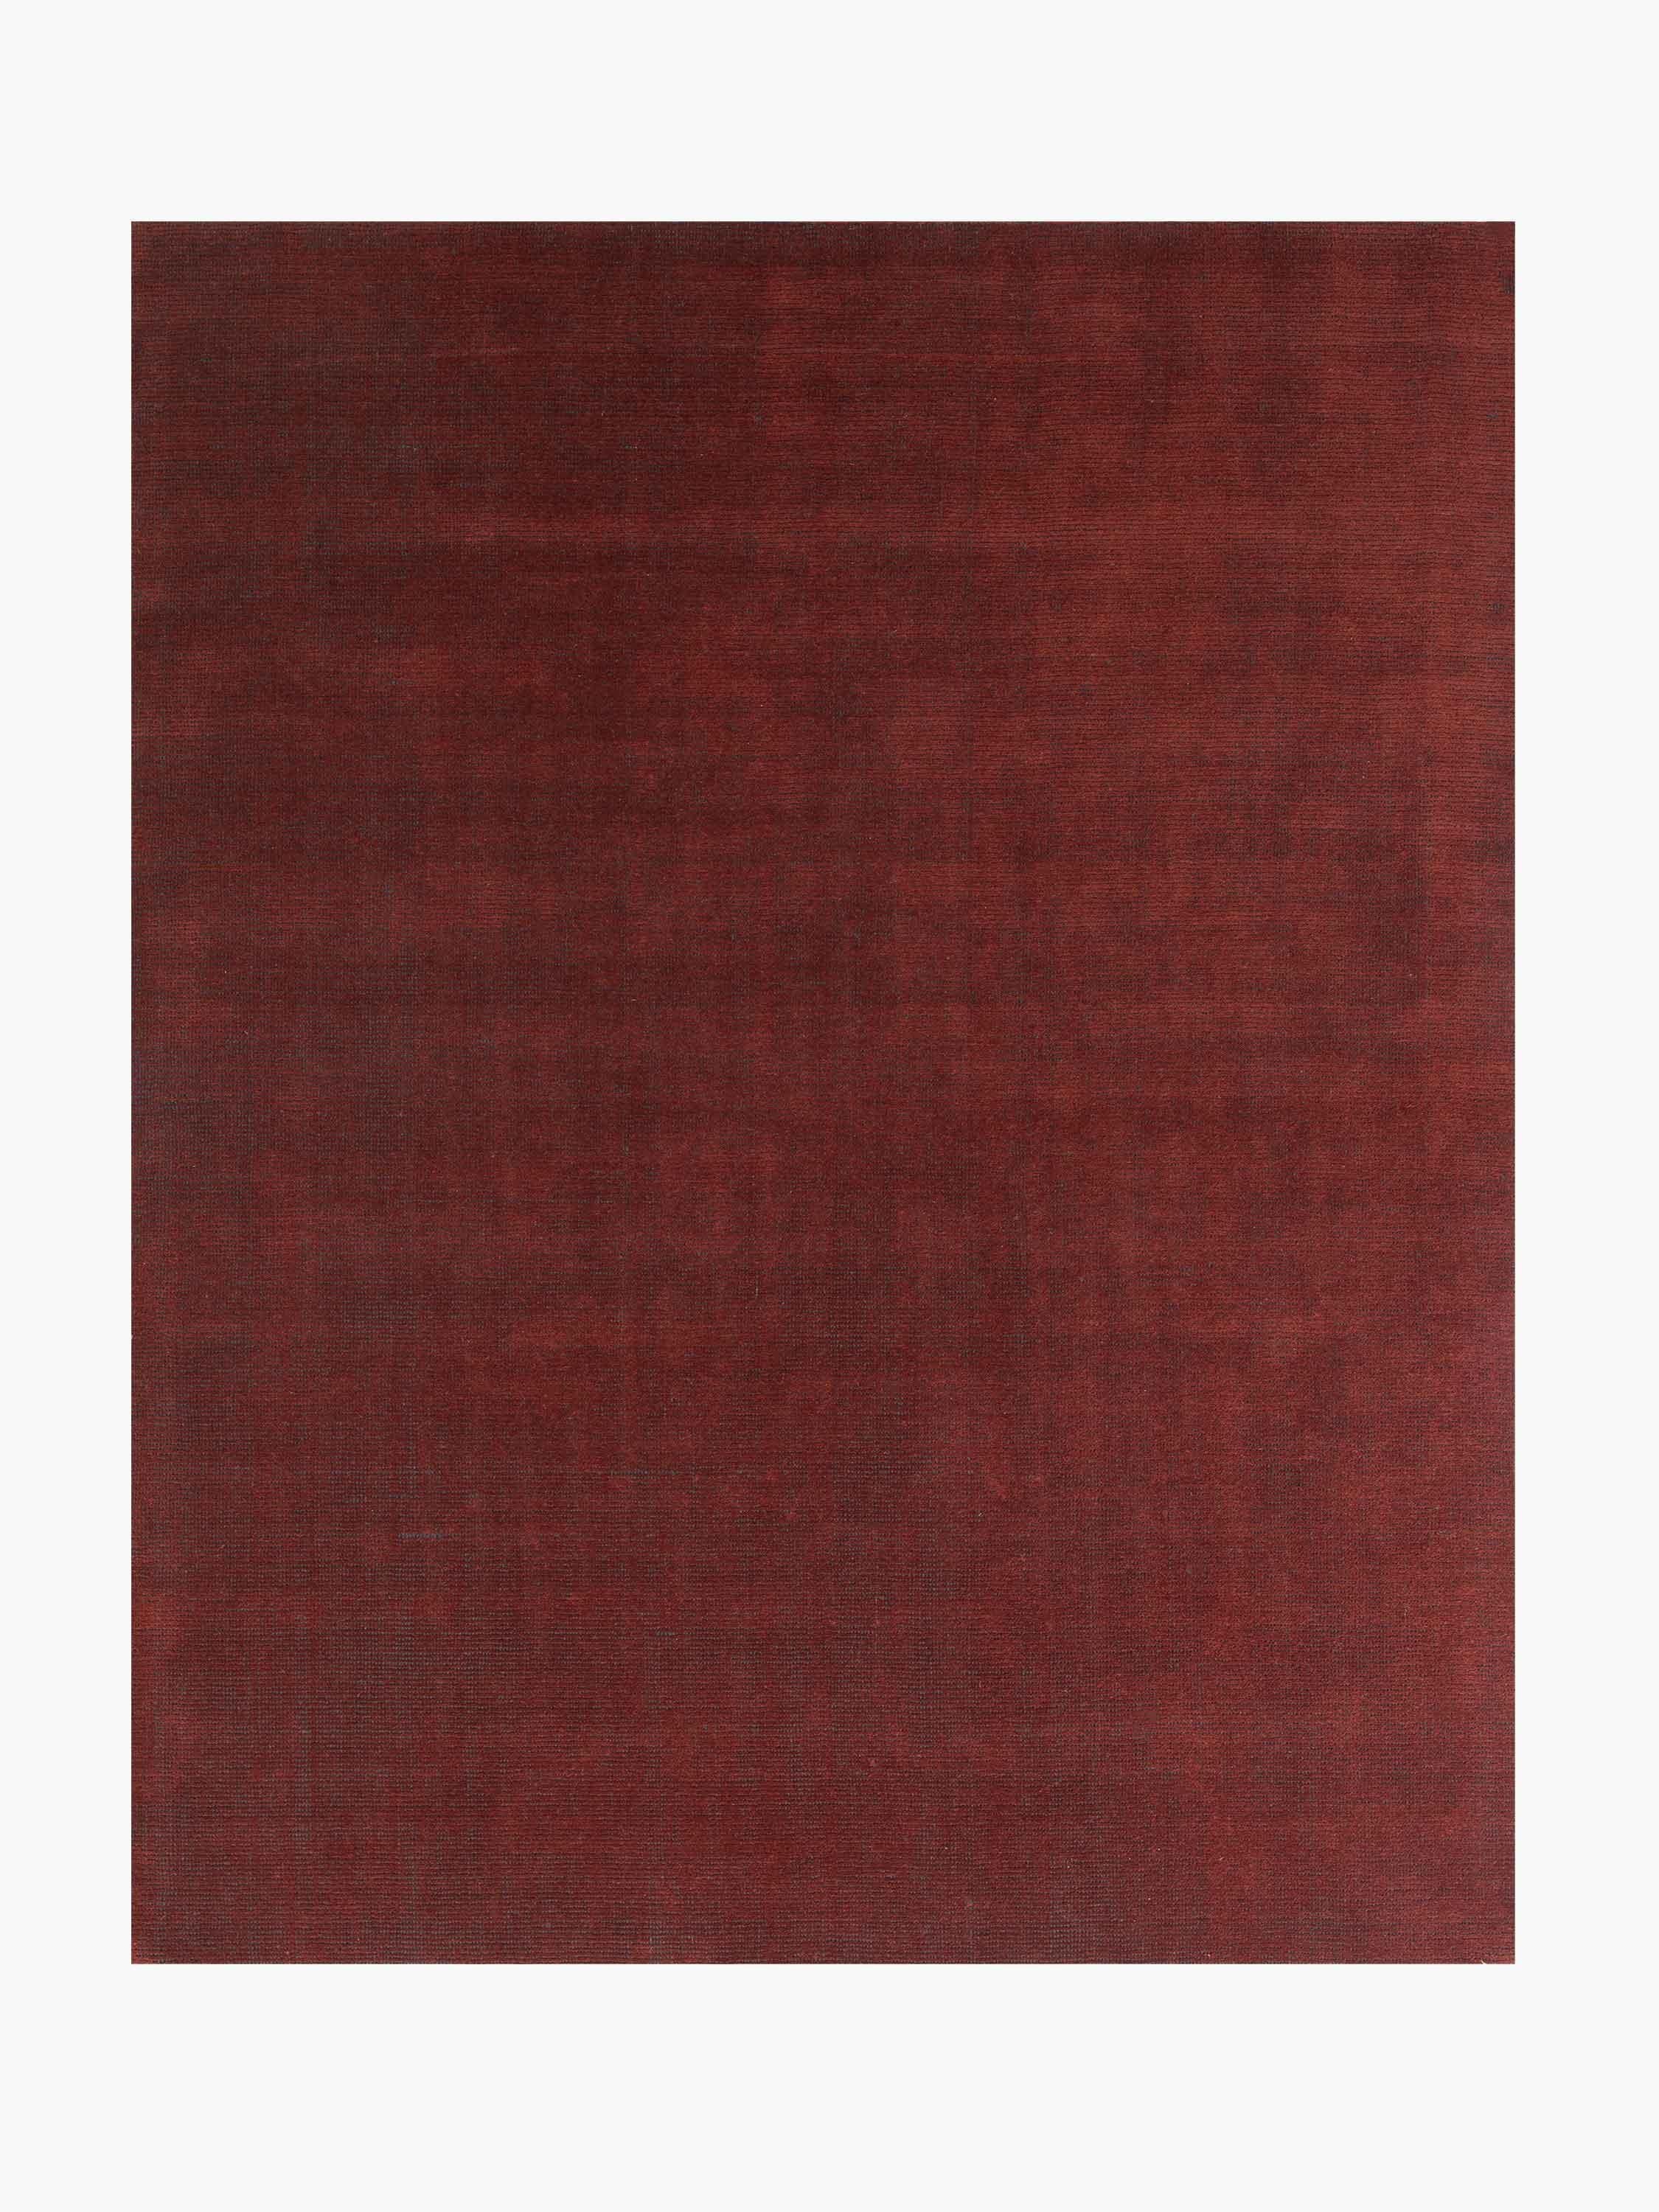 For Sale: Red (Distressed Wool Amber) Ben Soleimani Distressed Wool Rug 6'x9' 2